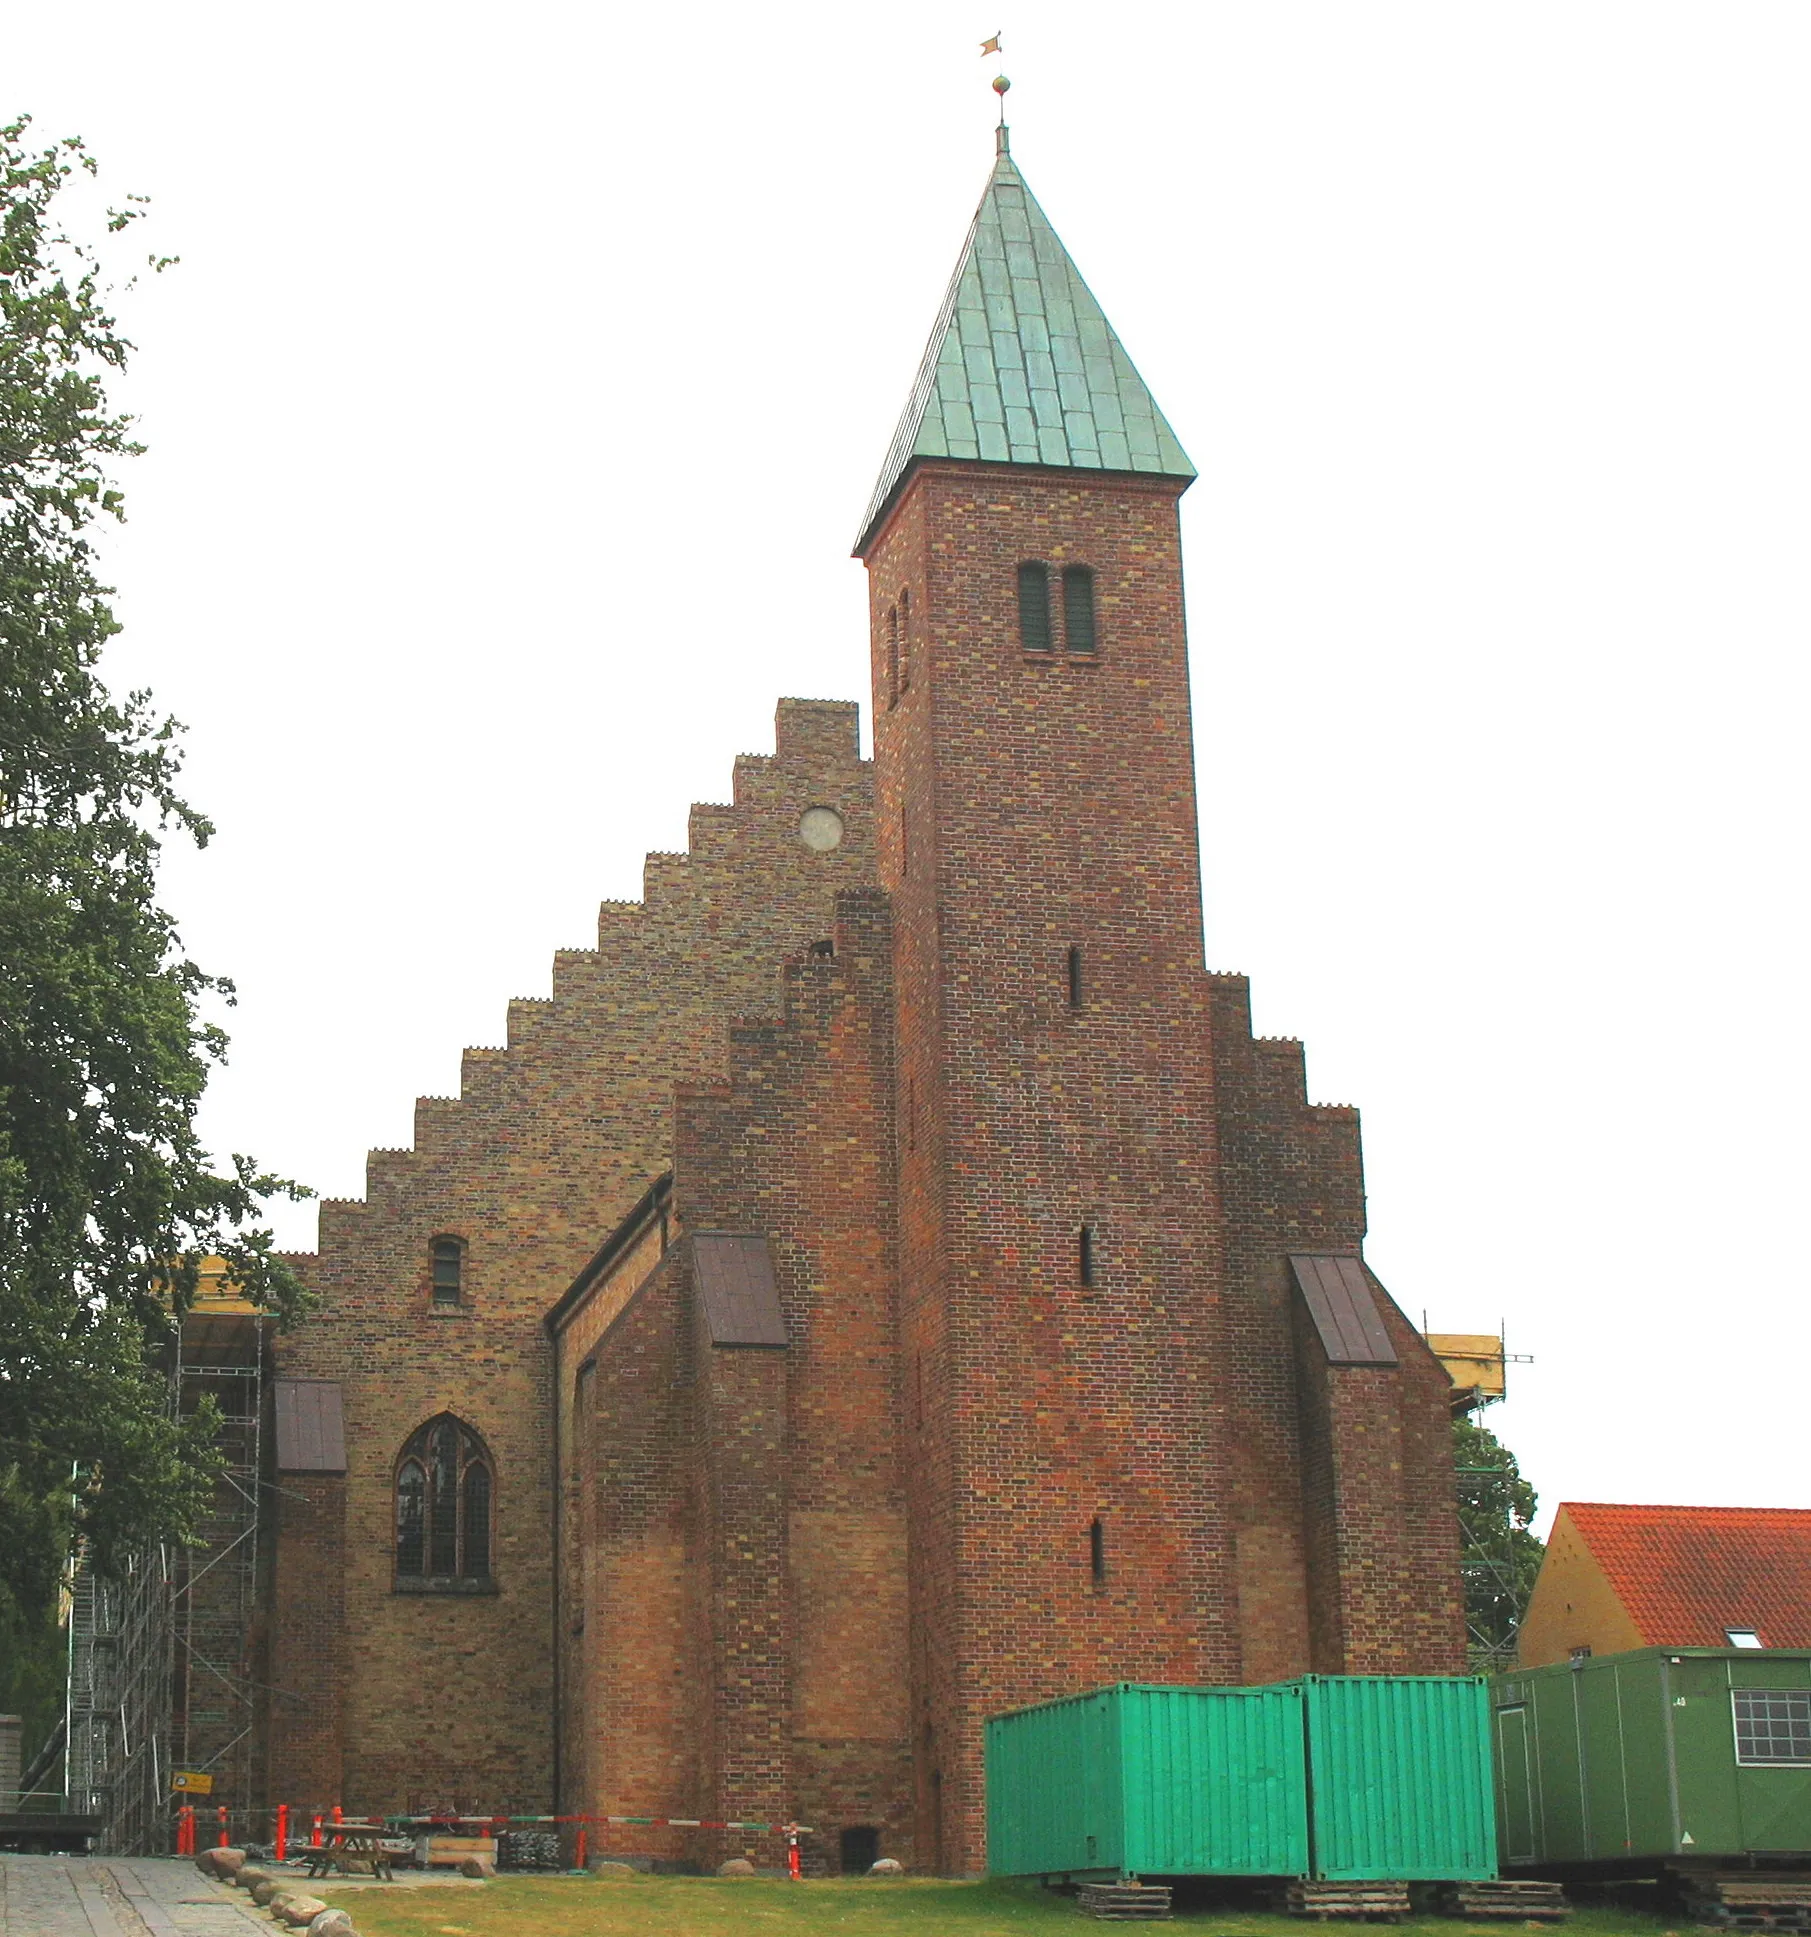 Photo showing: The cathedral "Maribo Domkirke" in the town "Maribo". It is located on the island Lolland in east Denmark.